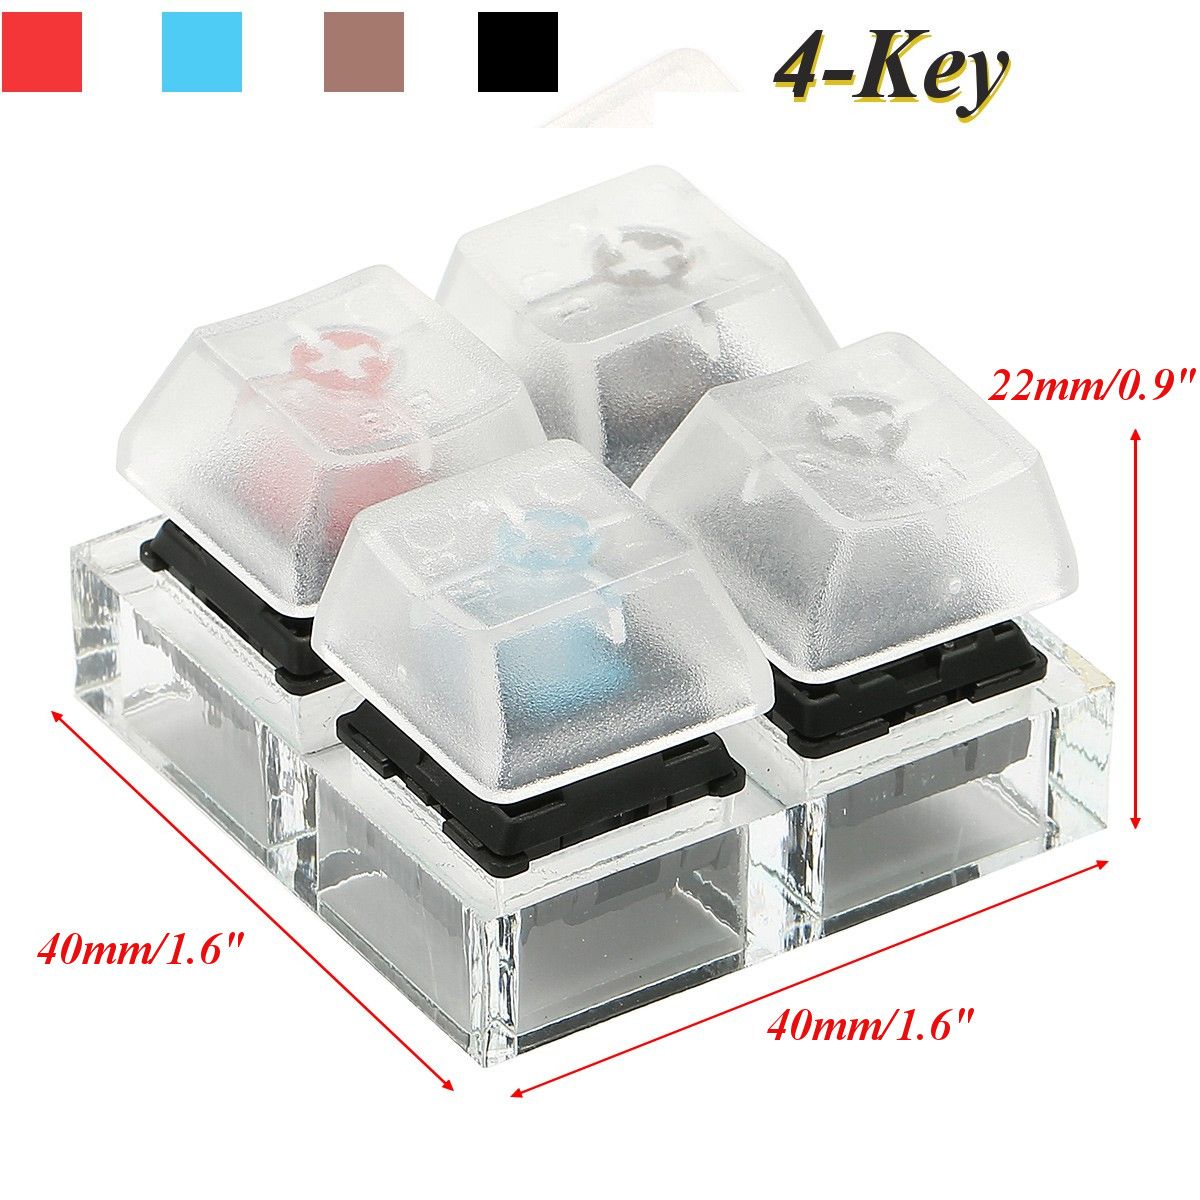 4-Mechanical-Keyboards-Switch-Tester-Kit-Keycaps-Switches-Sampler-For-Cherry-MX-1127151